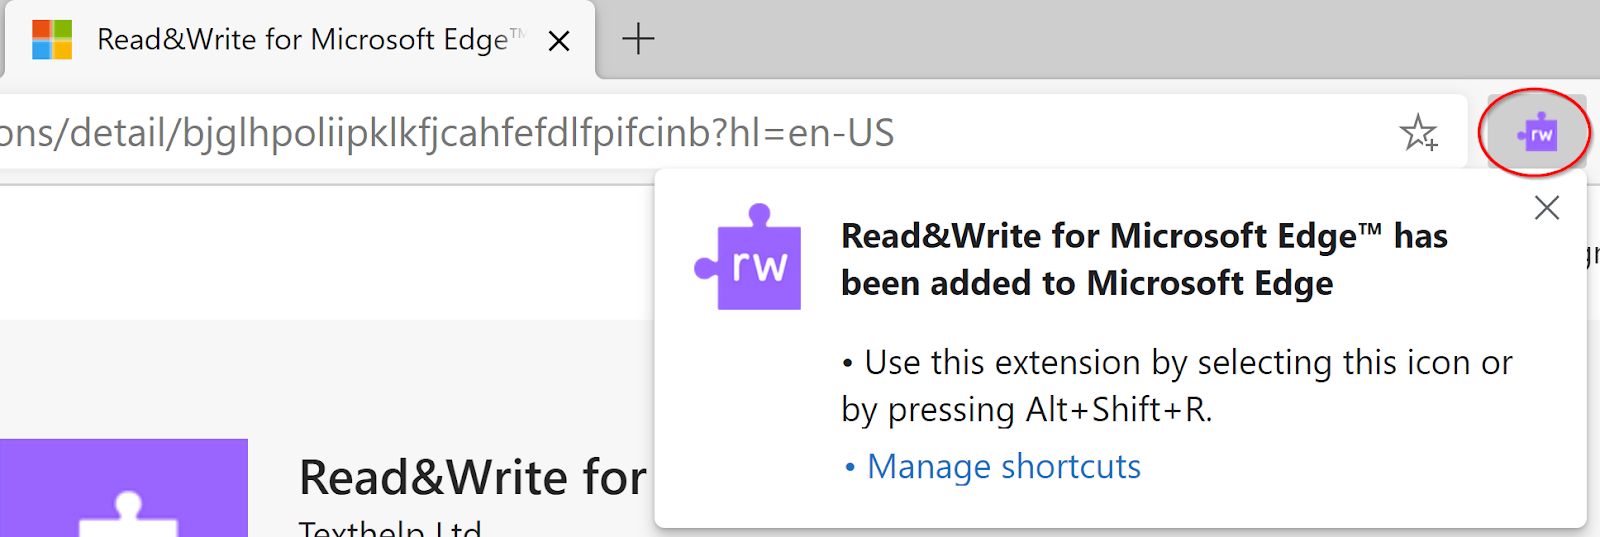 Confirmation window that extension has been added